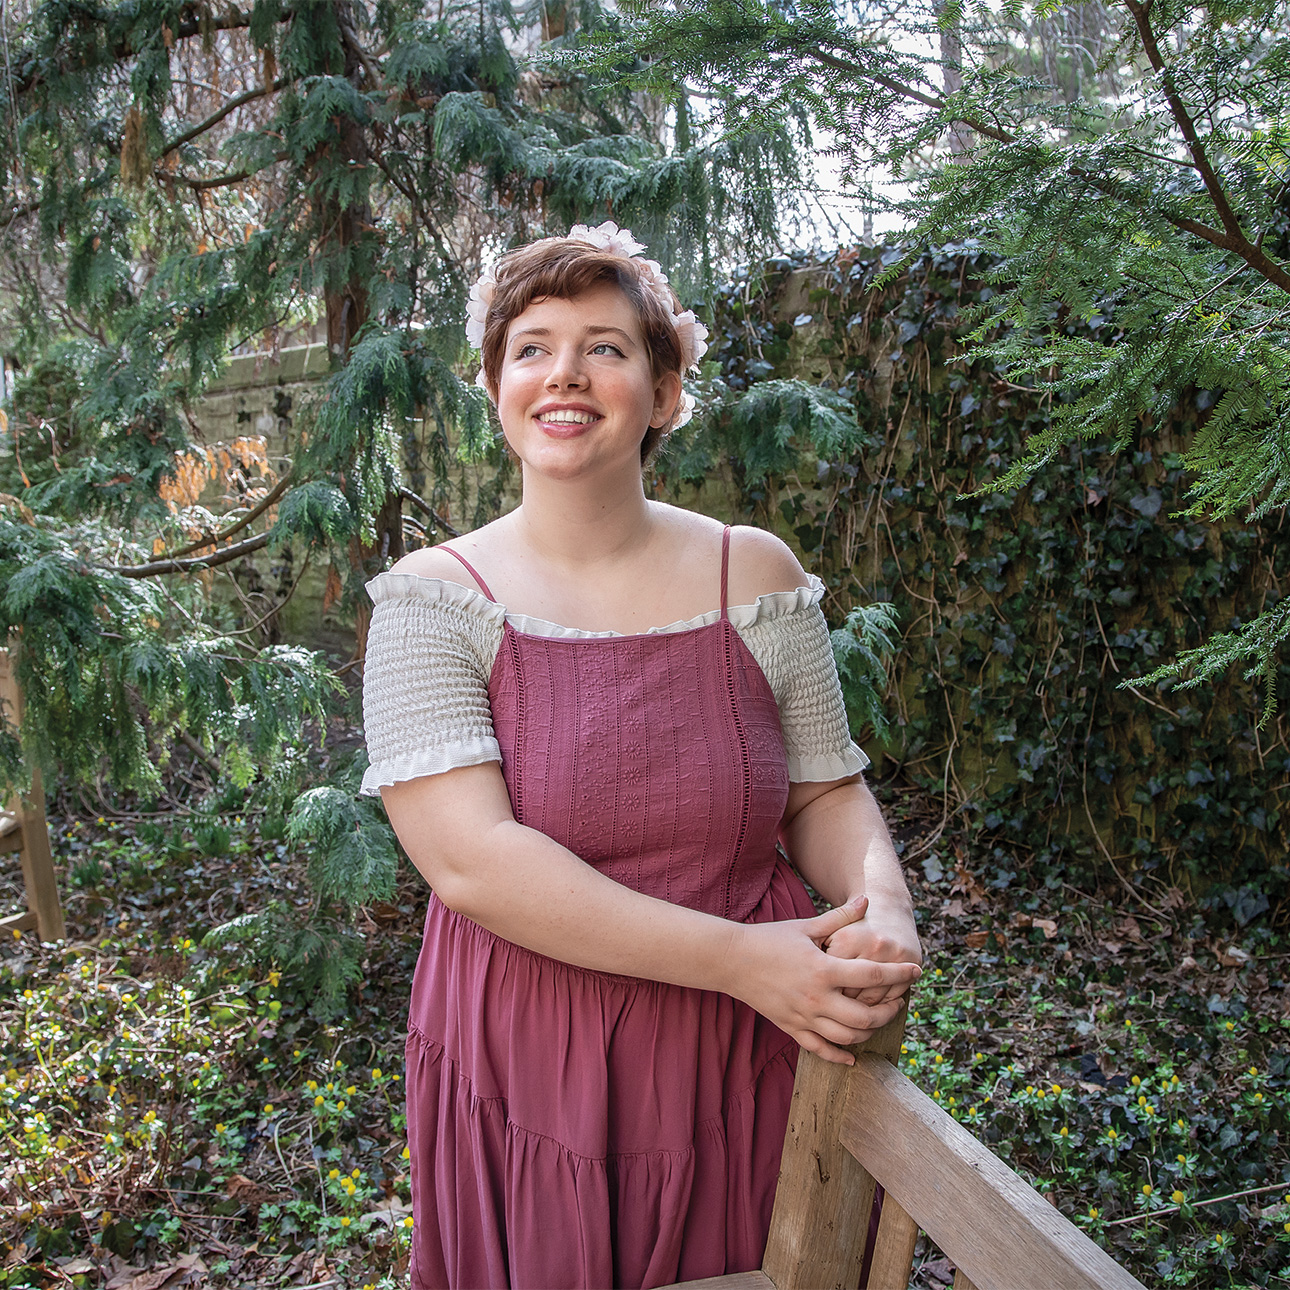 Elizabeth Dudley smiles in a forested area wearing a floral crown and an off-shoulder smocked white top with a dark pink spaghetti-strapped dress over it.